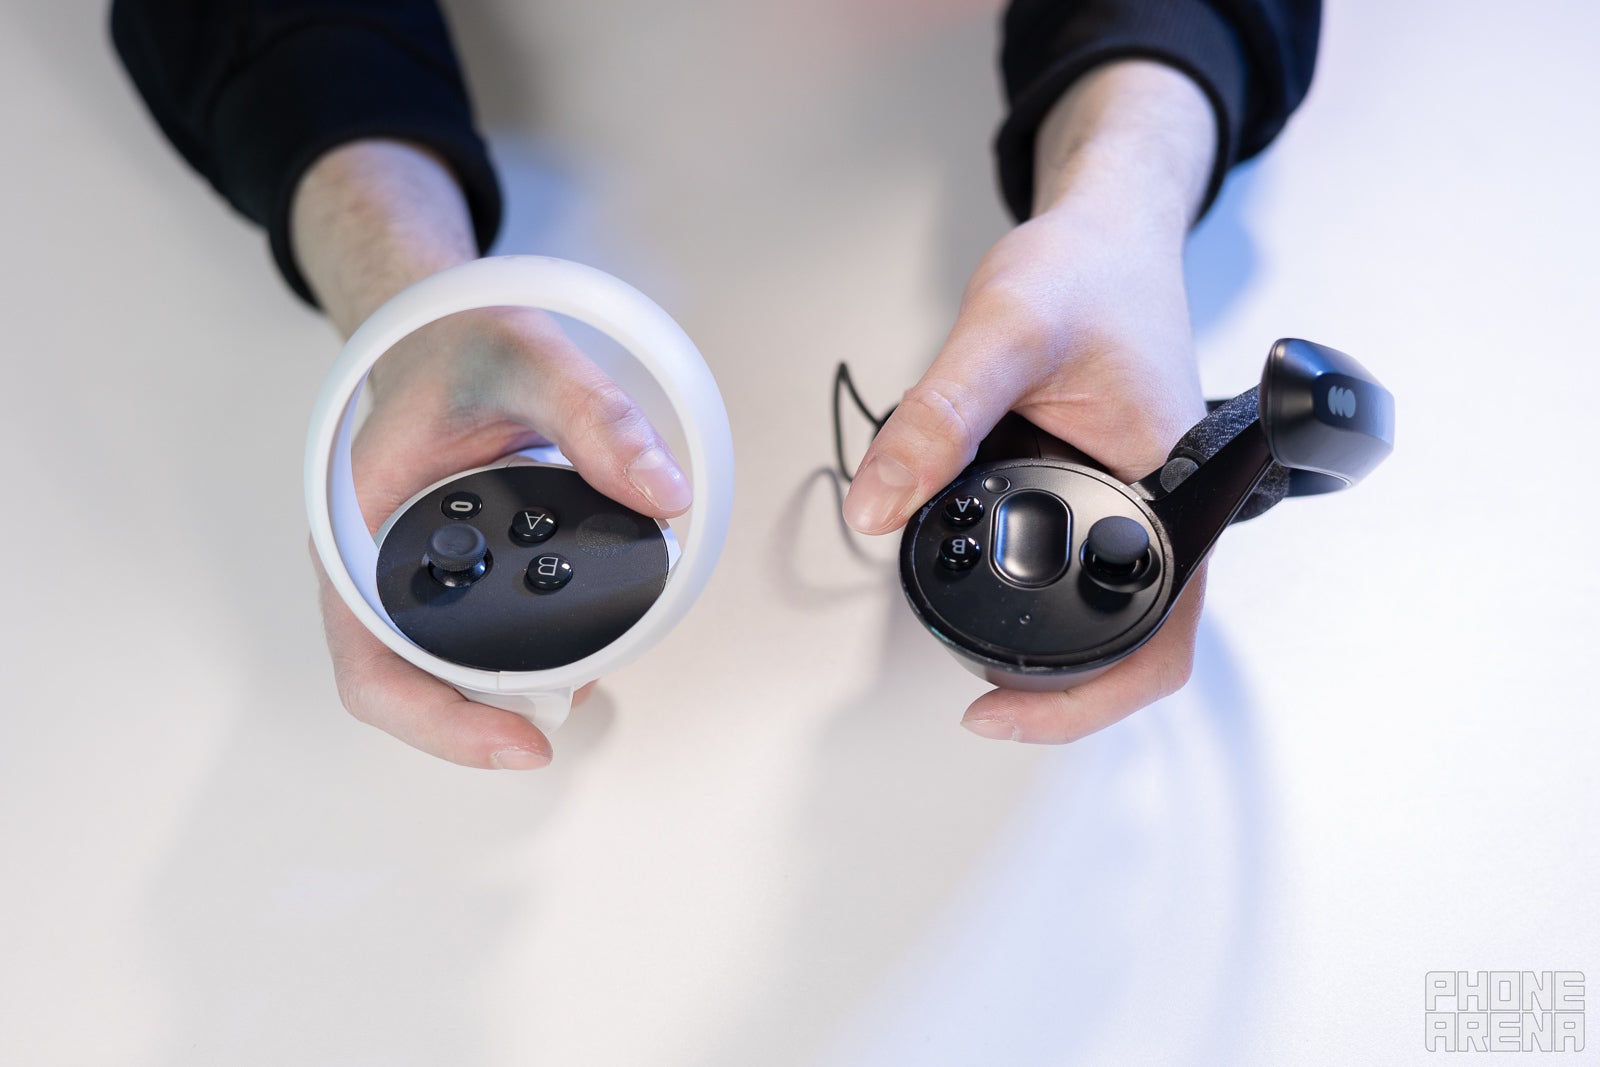 (Image Credit - PhoneArena) Top-down view of the controllers - Meta Quest 2 vs Valve Index: Meta is just on another level with its virtual reality headsets